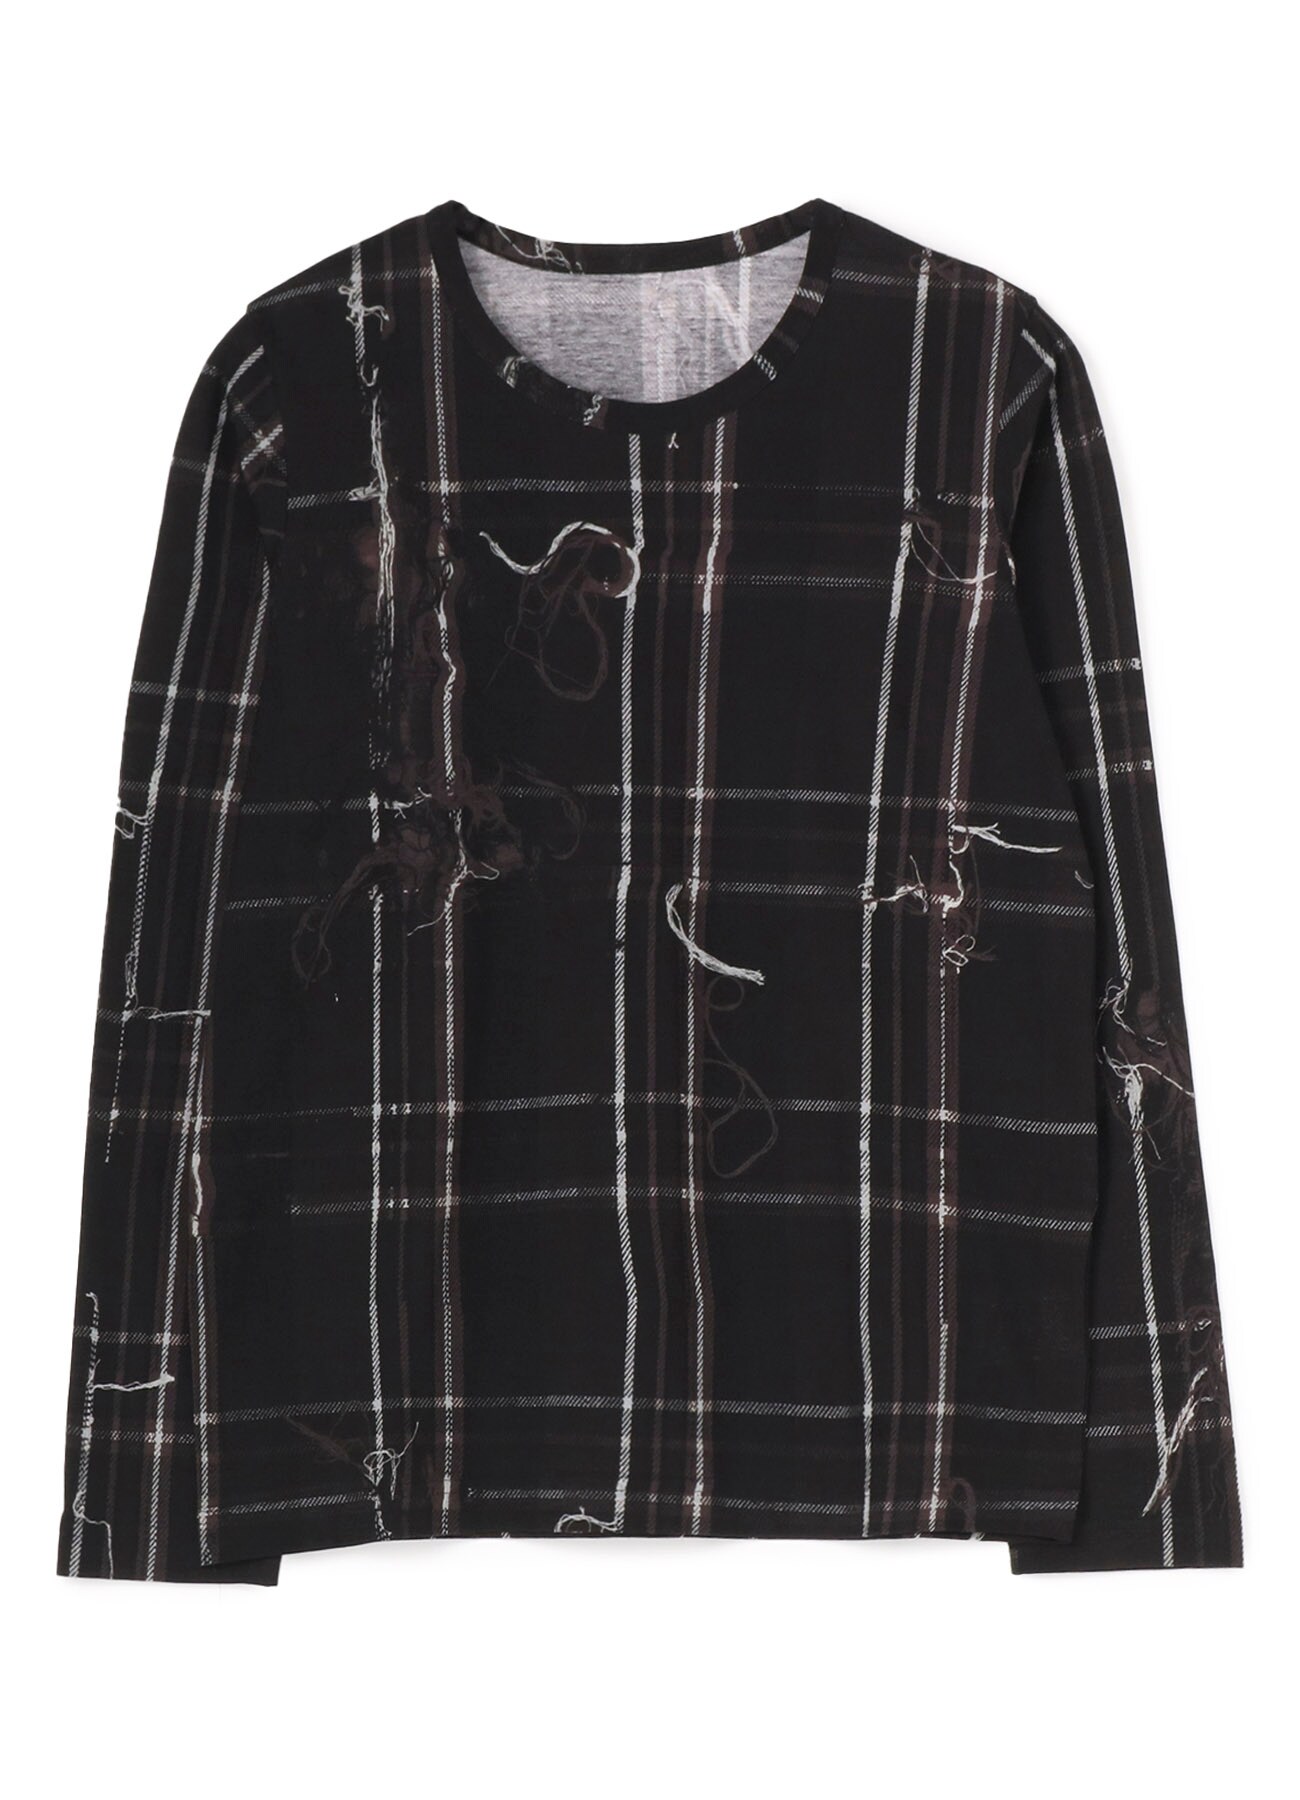 TWISTED CHECK ROUND NECK LONG SLEEVE